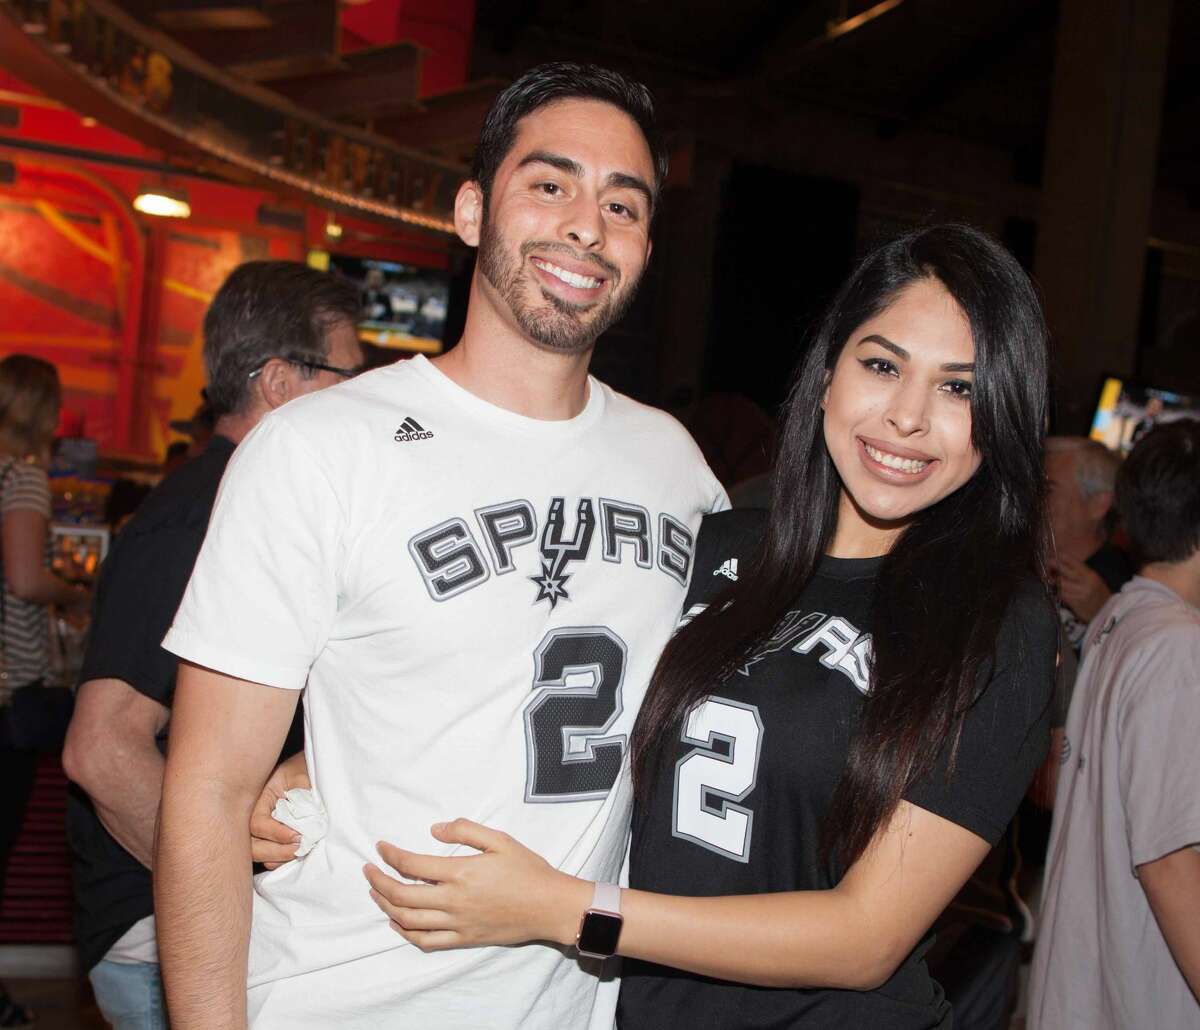 Spurs fans enjoyed an epic Game 1 win against the Oklahoma City Thunder Saturday night, April 30, 2016, at the AT&T Center. Here is a look at how everyone celebrated the boys in Black and Silver.